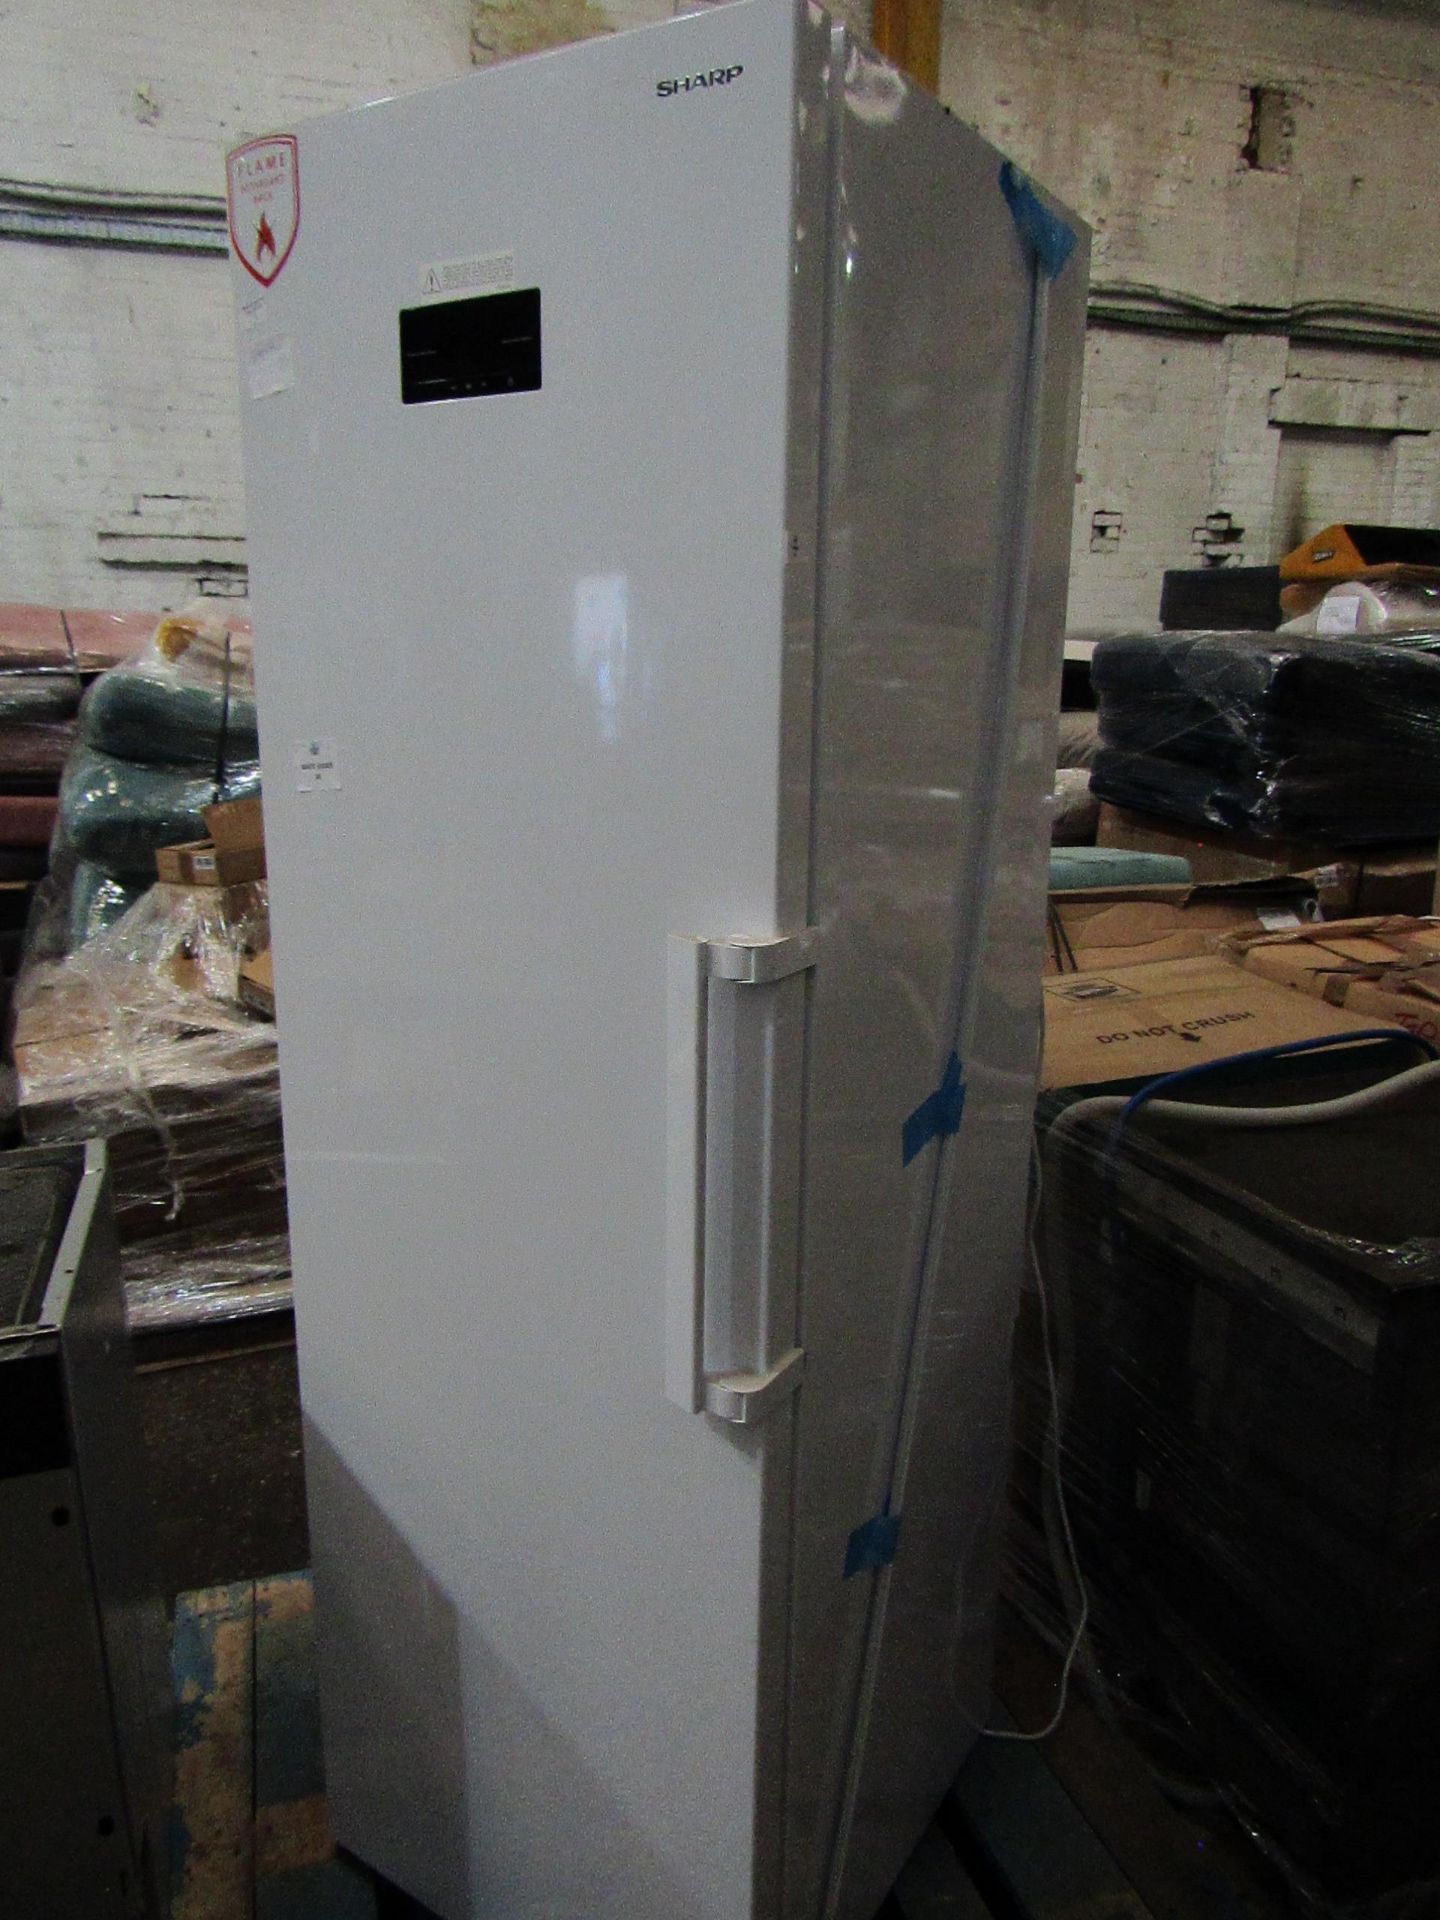 Sharp tall freestaNDing freezer, powers on but not getting cold